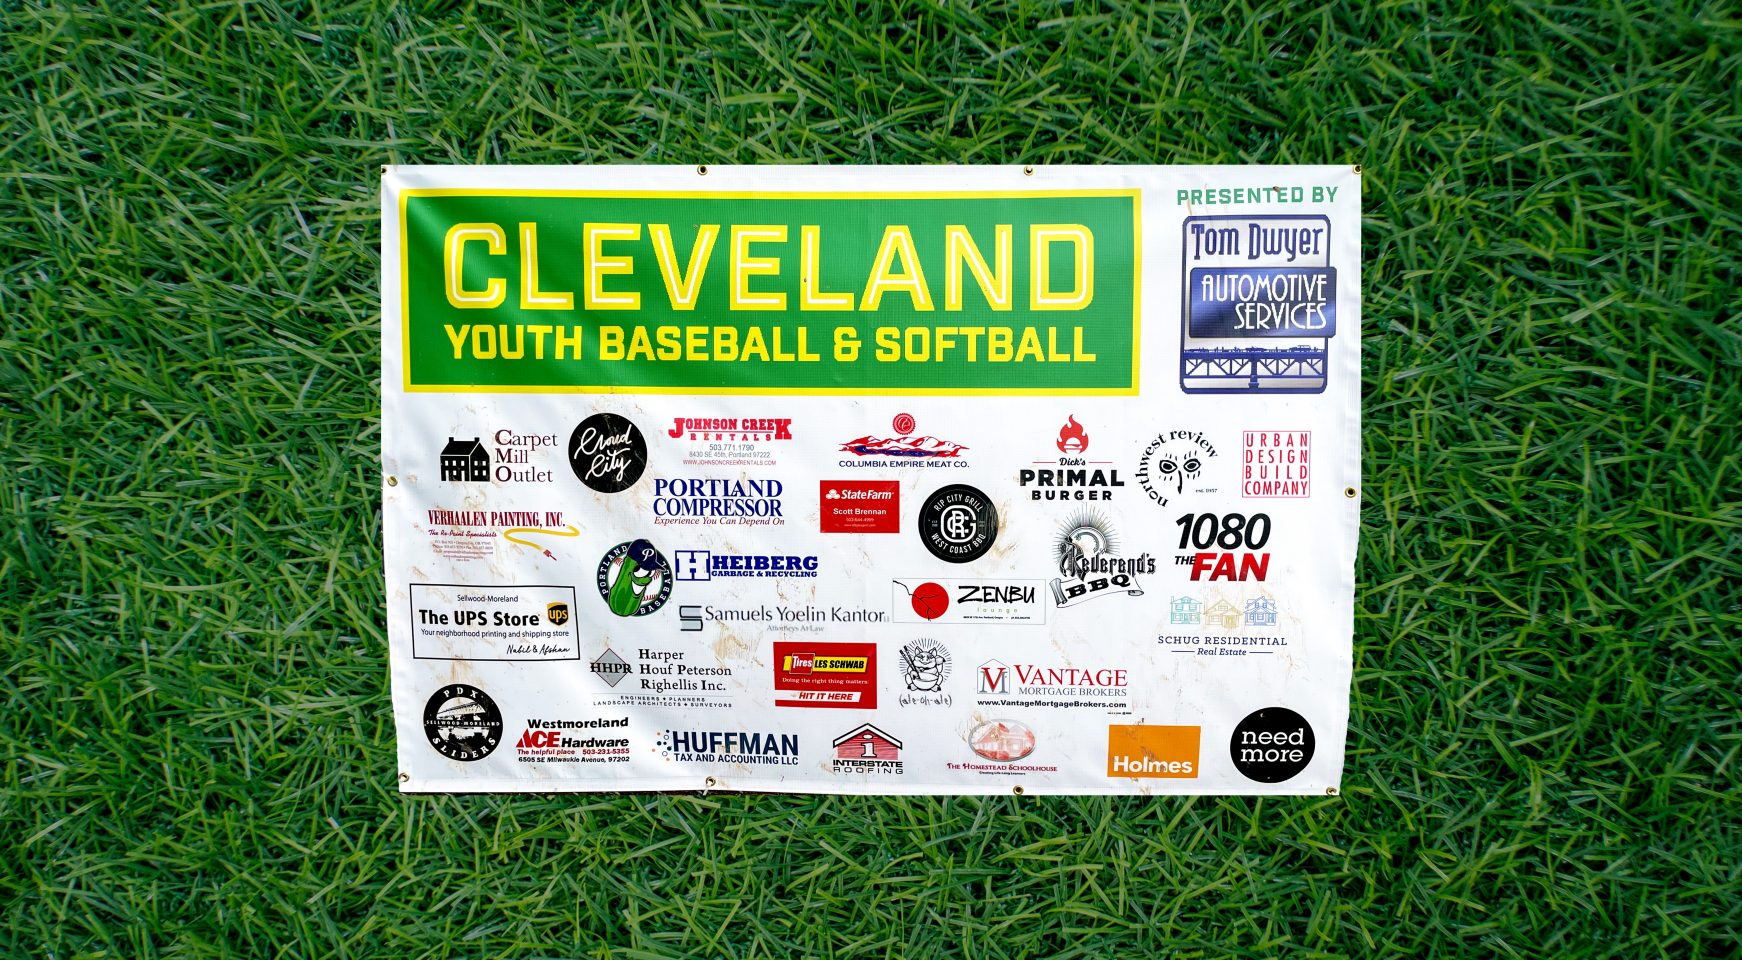 Banner with all of the CYBS sponsors listed, including Tom Swyer Automotive Services, Neemdore Designs, Cloud City Ice Cream, Primal Burger, and other local businesses.